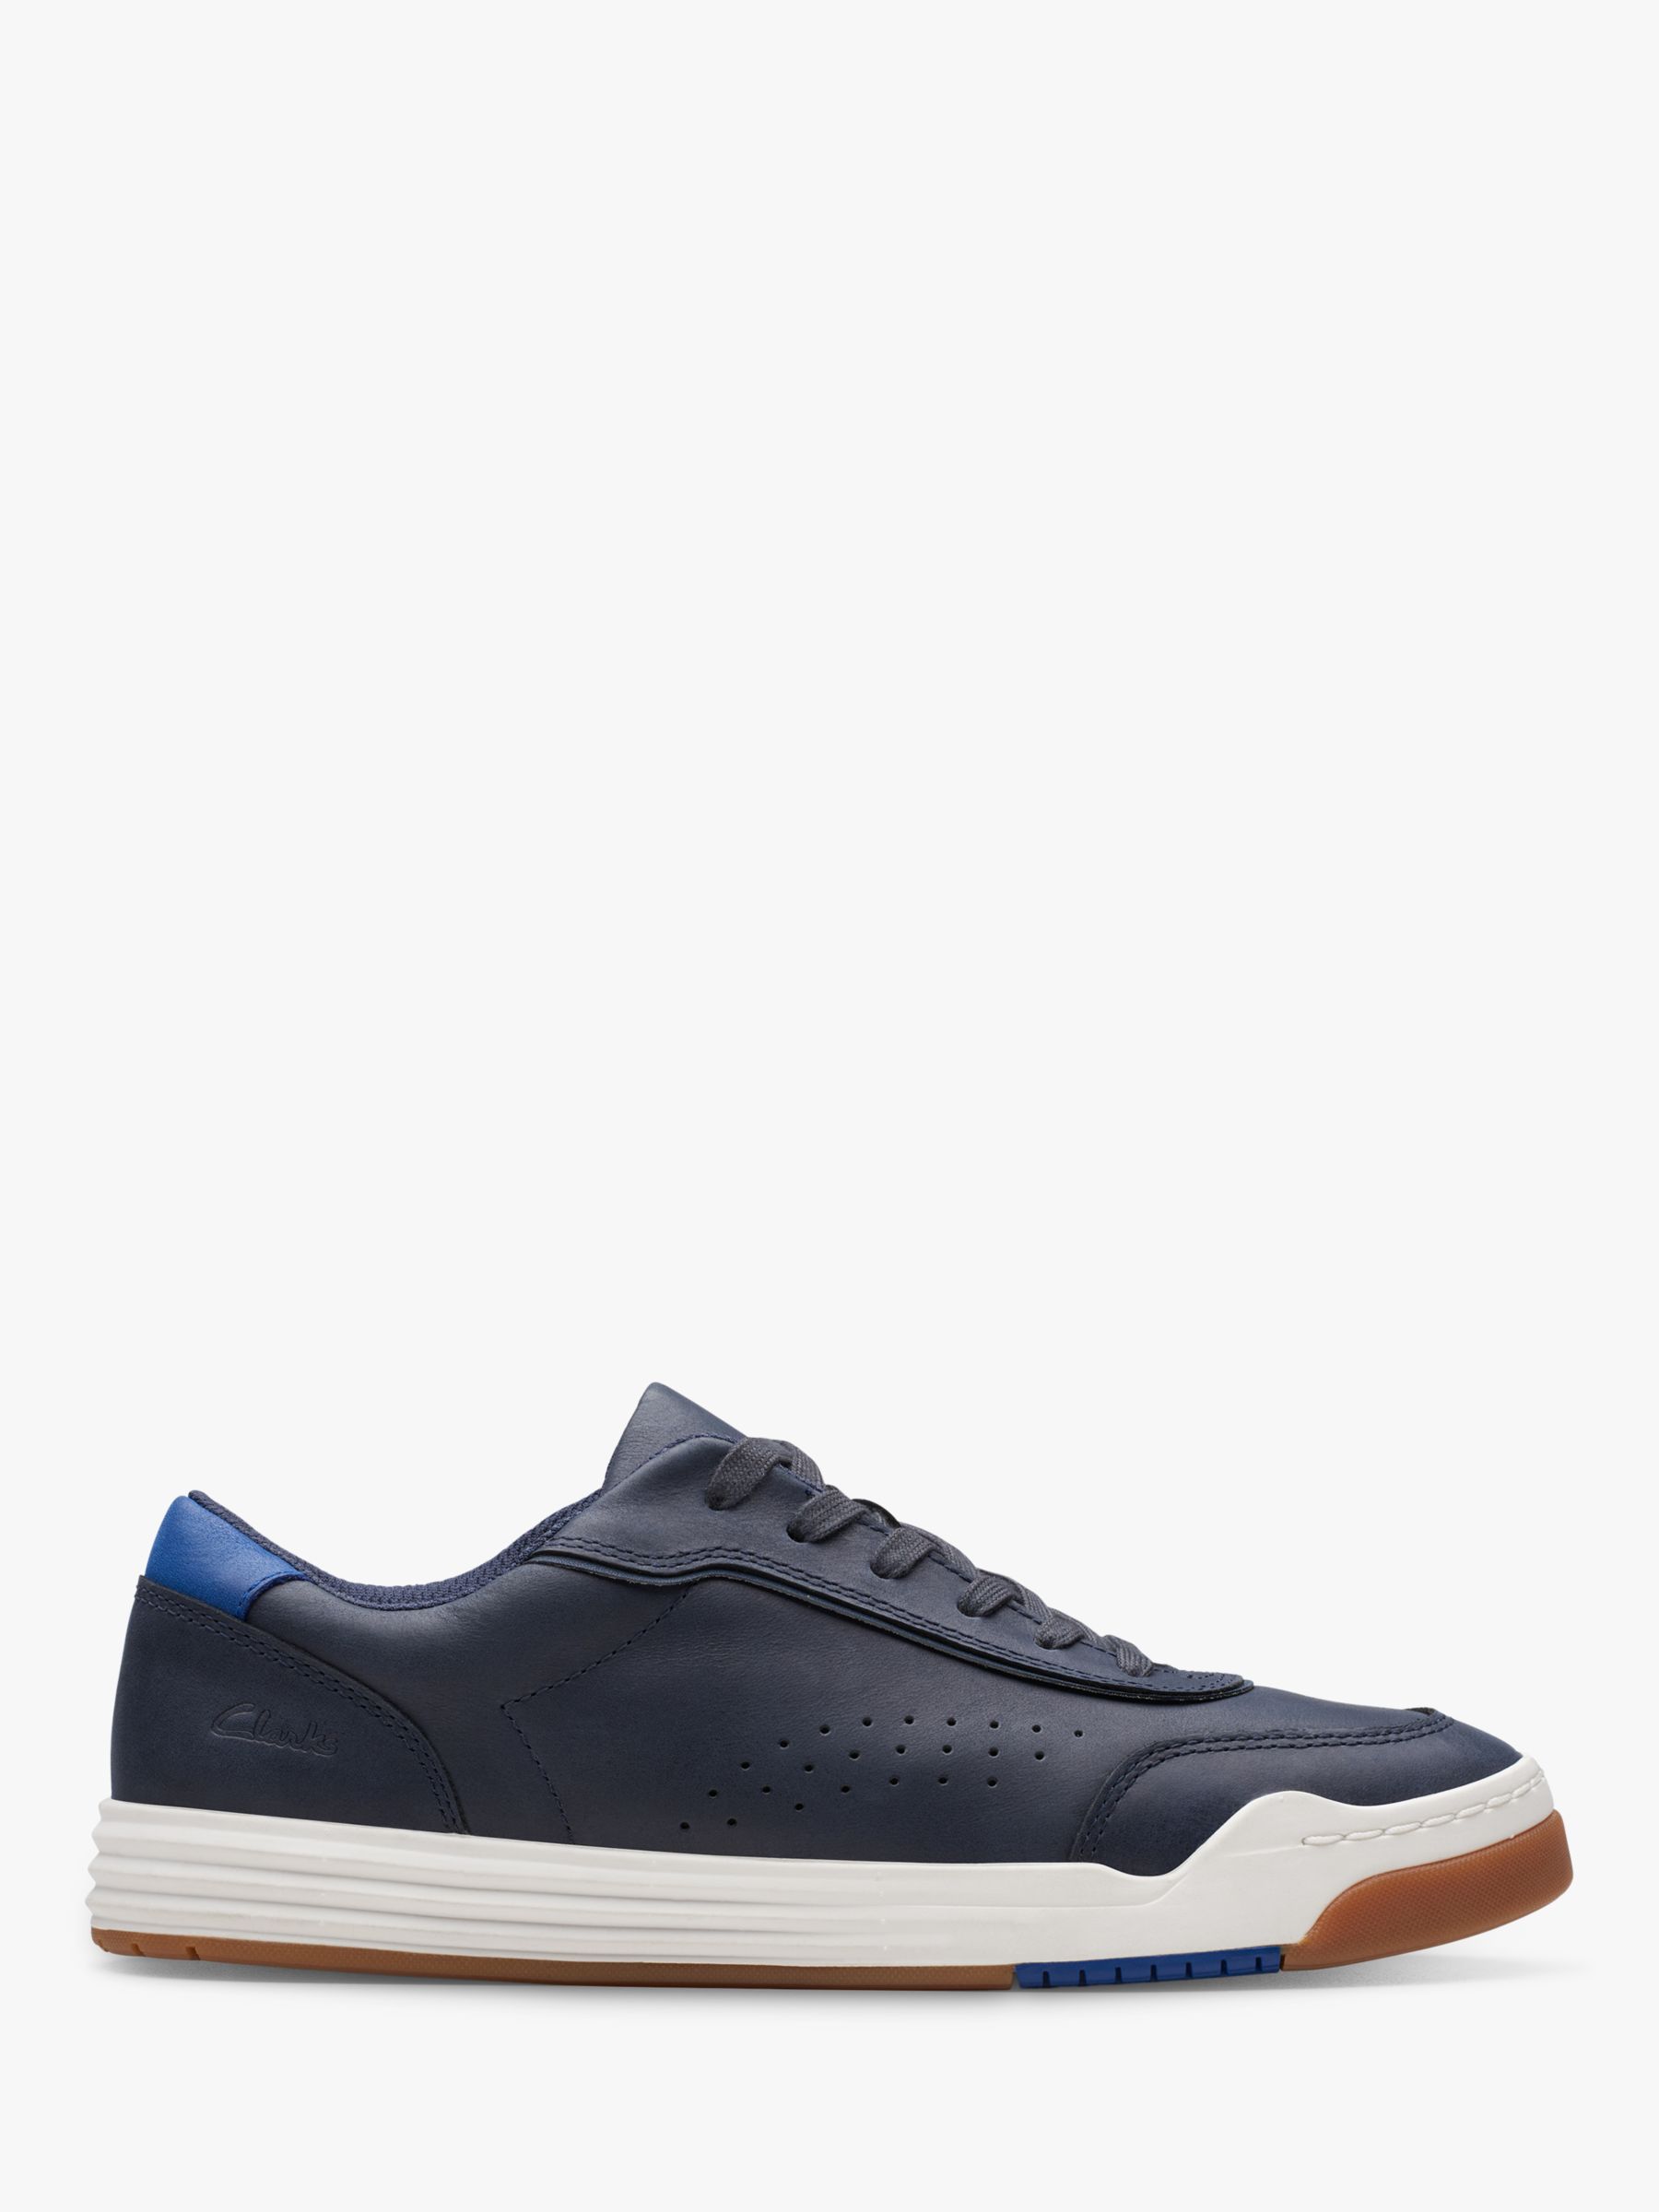 Clarks Kids' Urban Solo Leather Lace Up Trainers, Navy at John Lewis ...